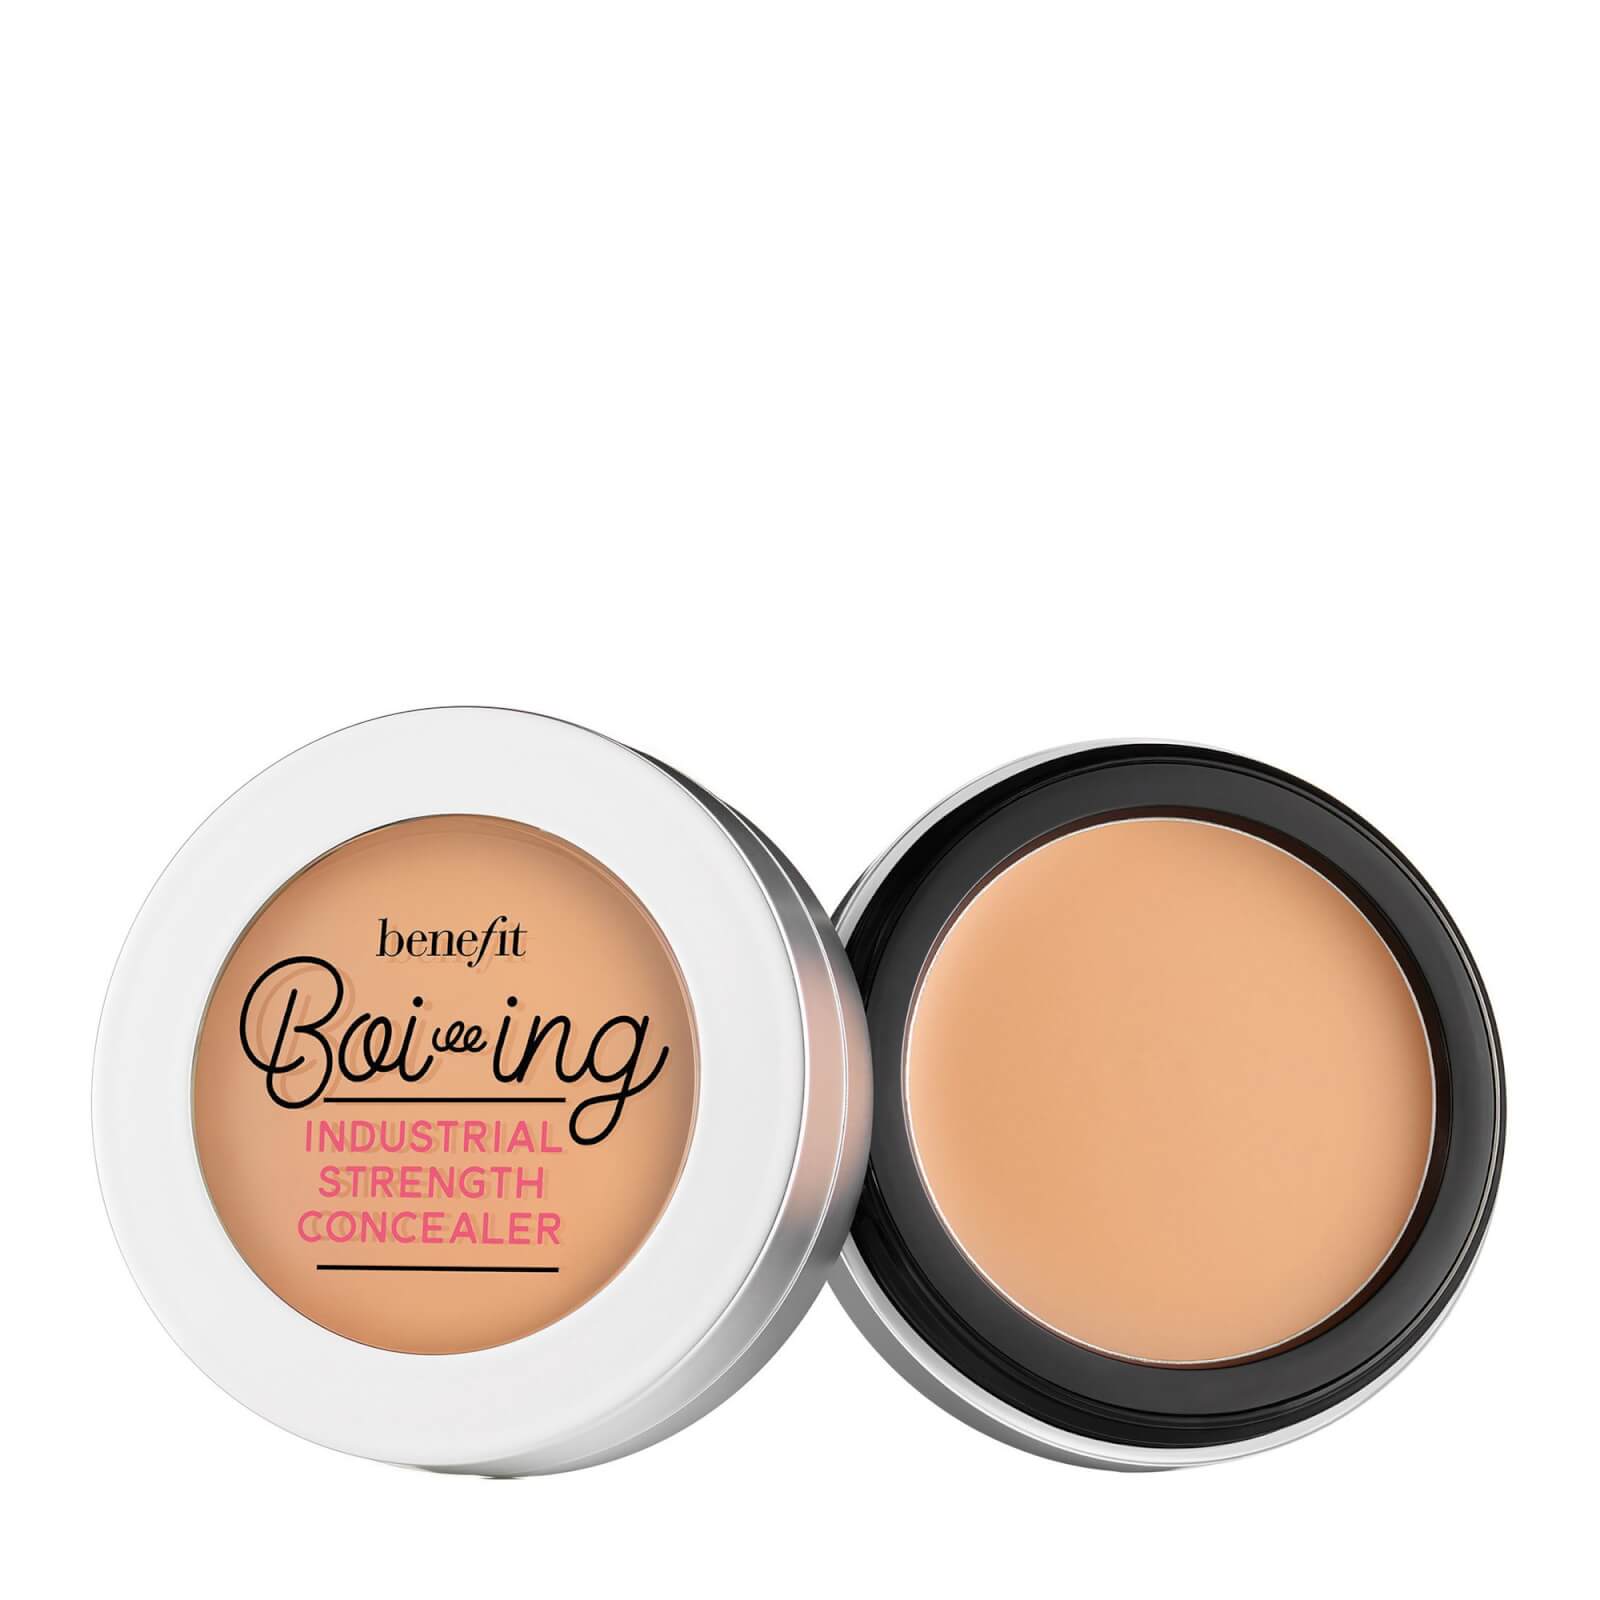 benefit Boi-ing Industrial Strength Concealer 3g (Various Shades) - 03